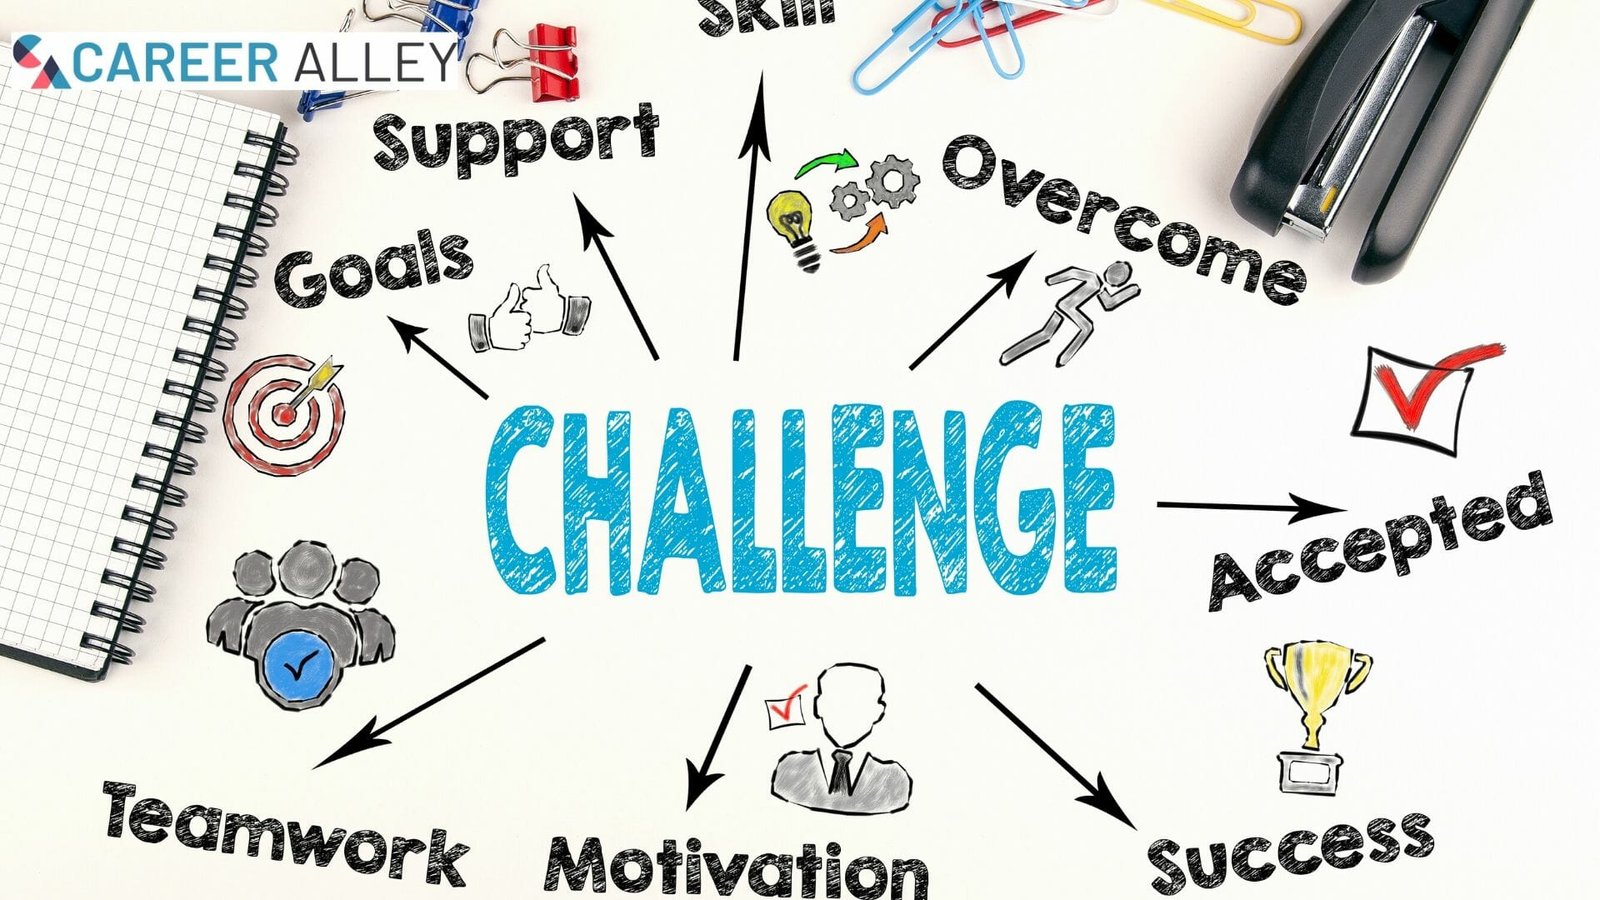 Careers That Challenge – CareerAlley